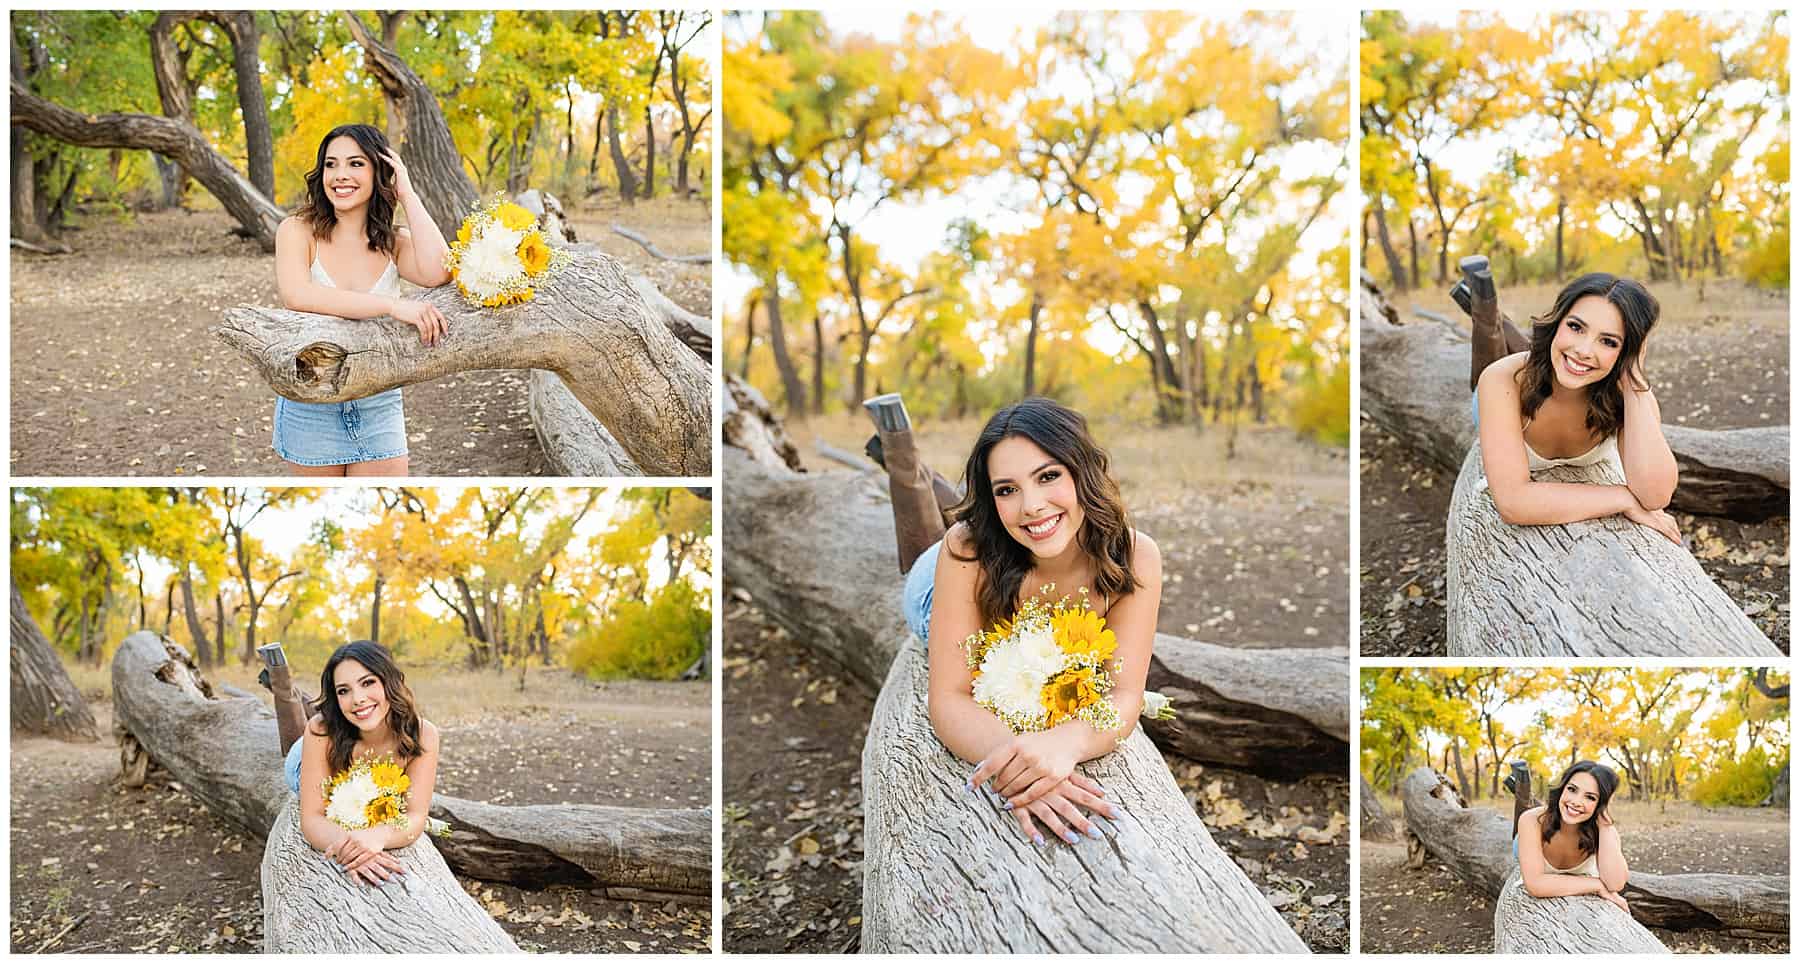 Senior Pictures, Senior Portrait session, pictures with movement, Candid images, Senior pictures filled with personality, Headshots, High School Senior, New Mexico Photographer , Albuquerque photographer, Santa Fe Photographer